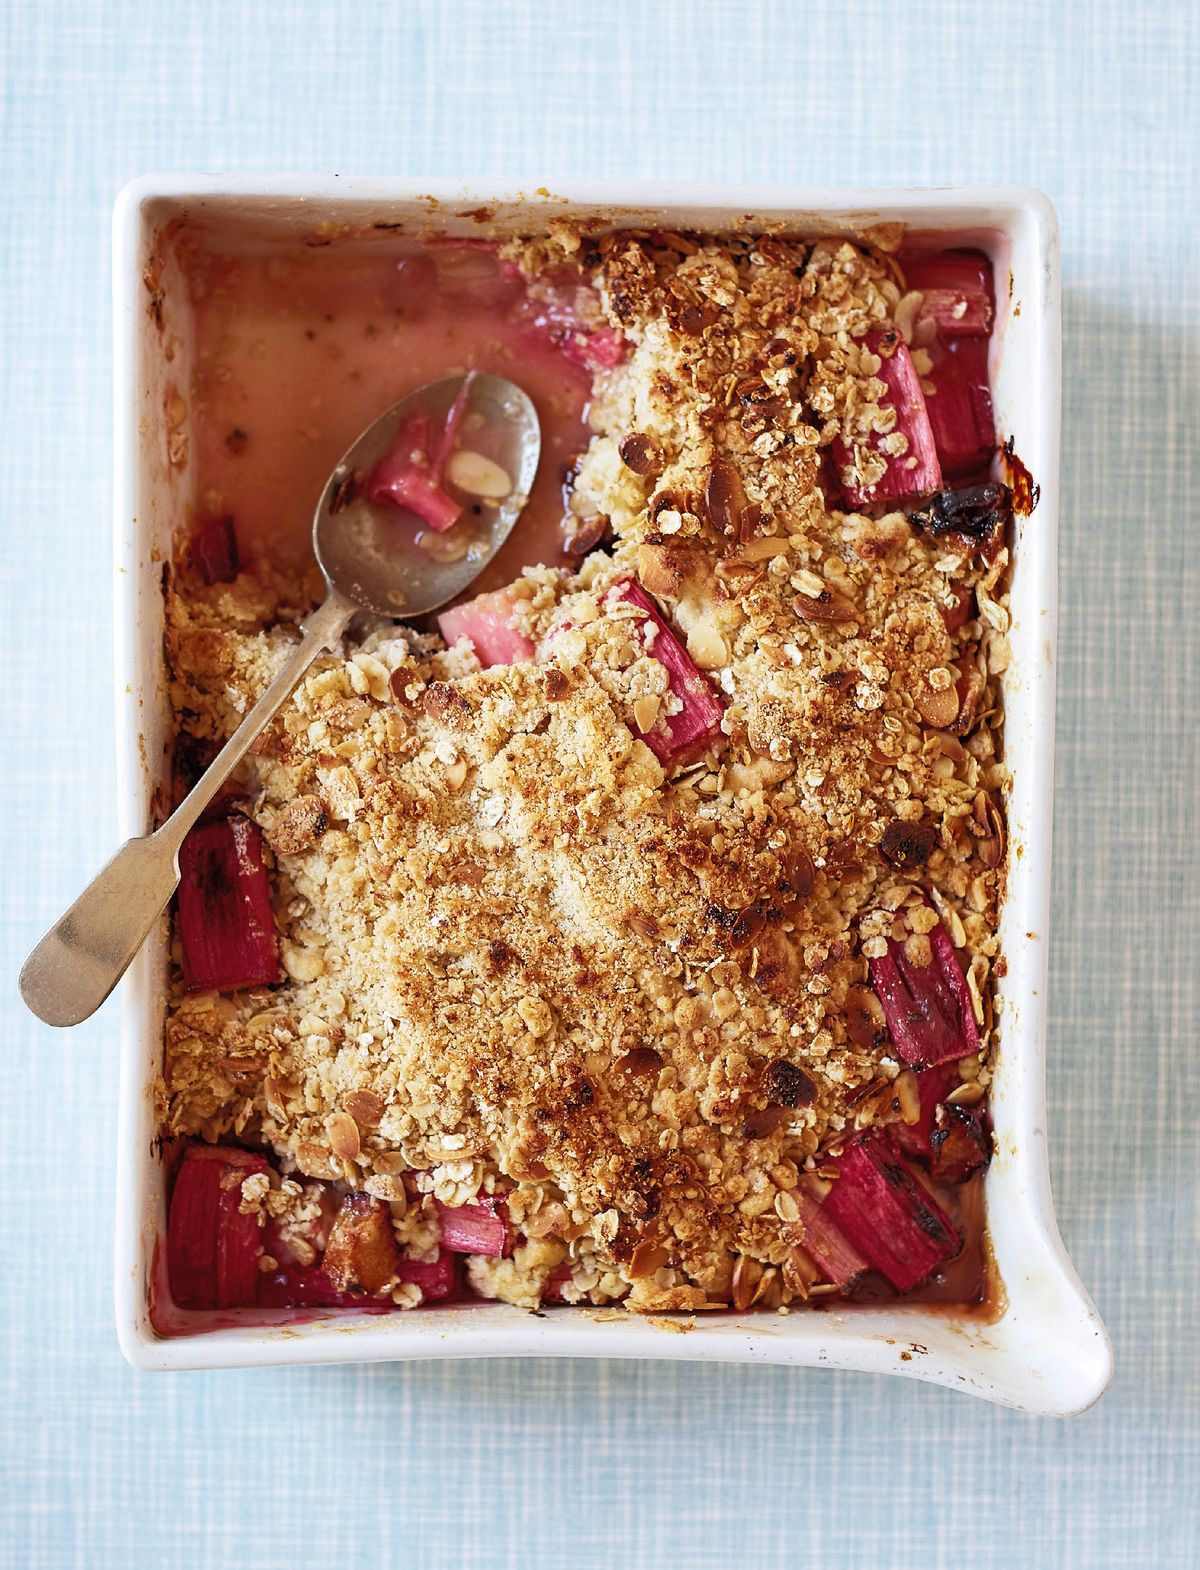 Fruity Rhubarb and Almond Crumble